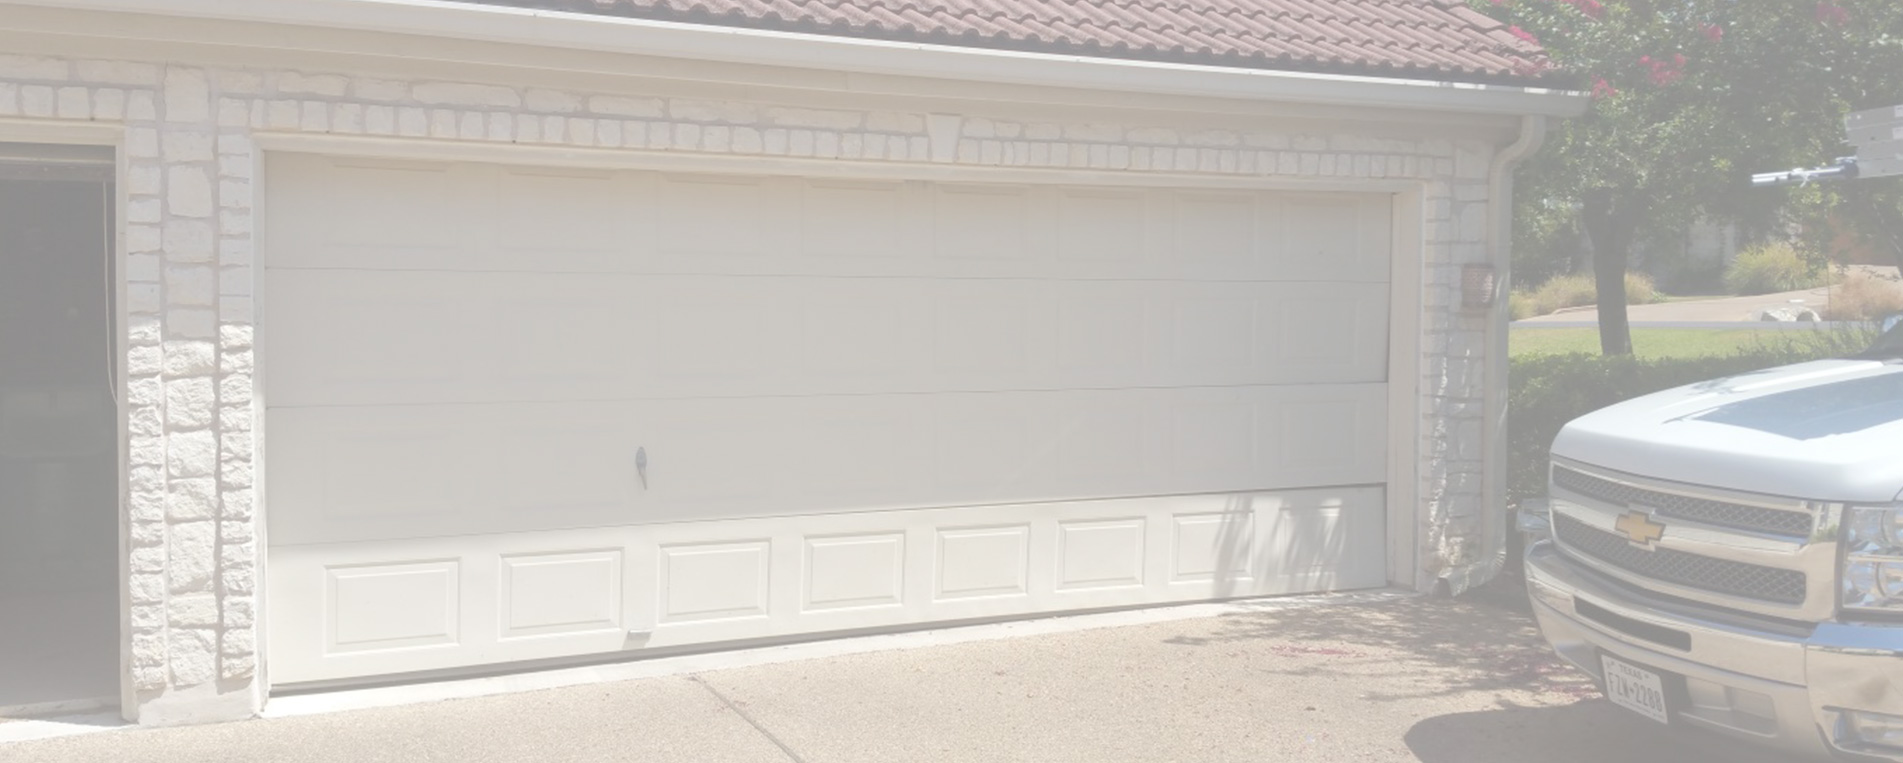 Cable Replacement For Garage Door In Carlsbad